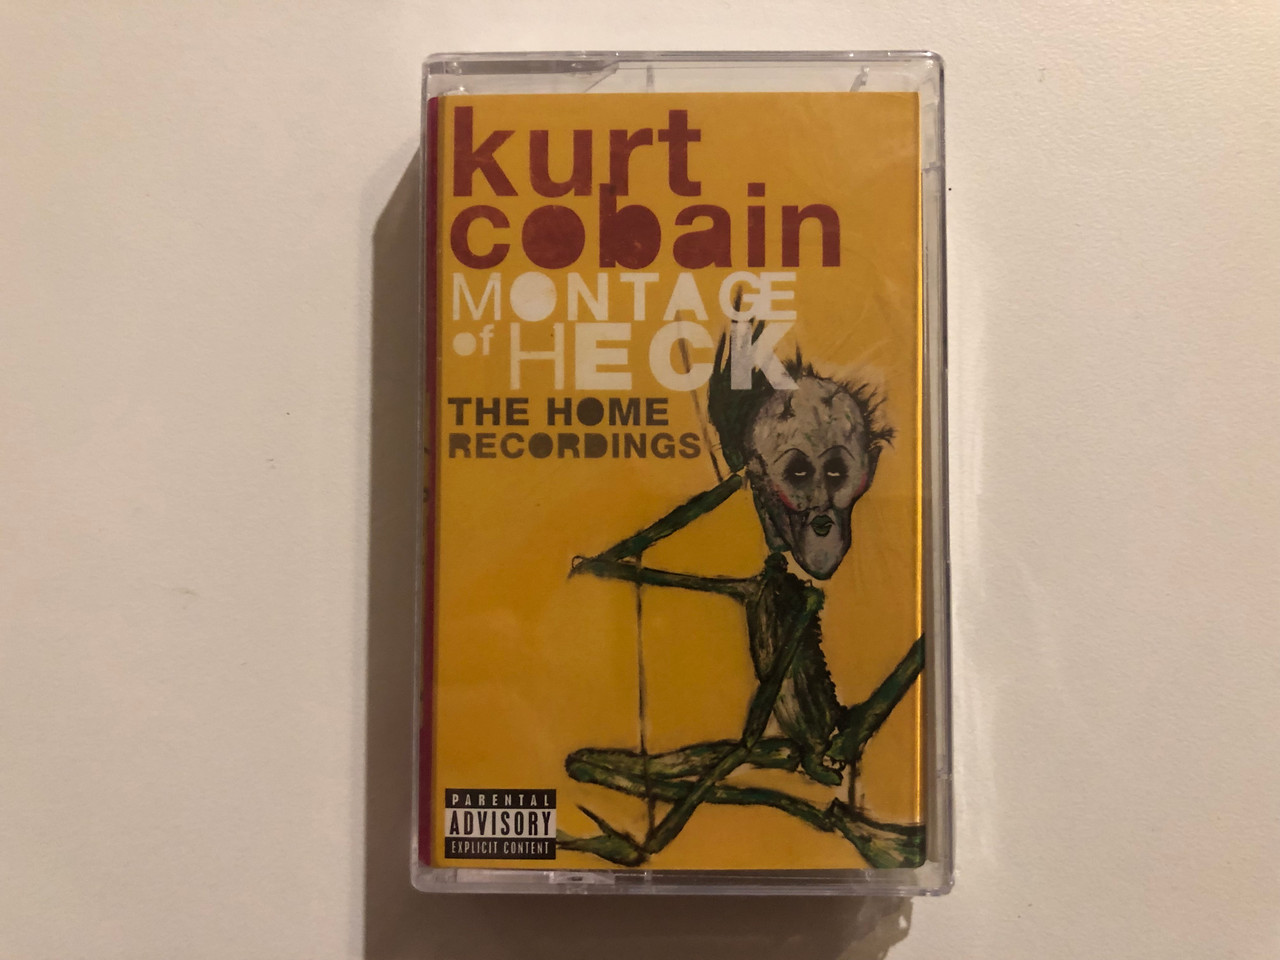 Kurt Cobain – Montage Of Heck: The Home Recordings / Universal Music Group  Audio Cassette / 602547607157